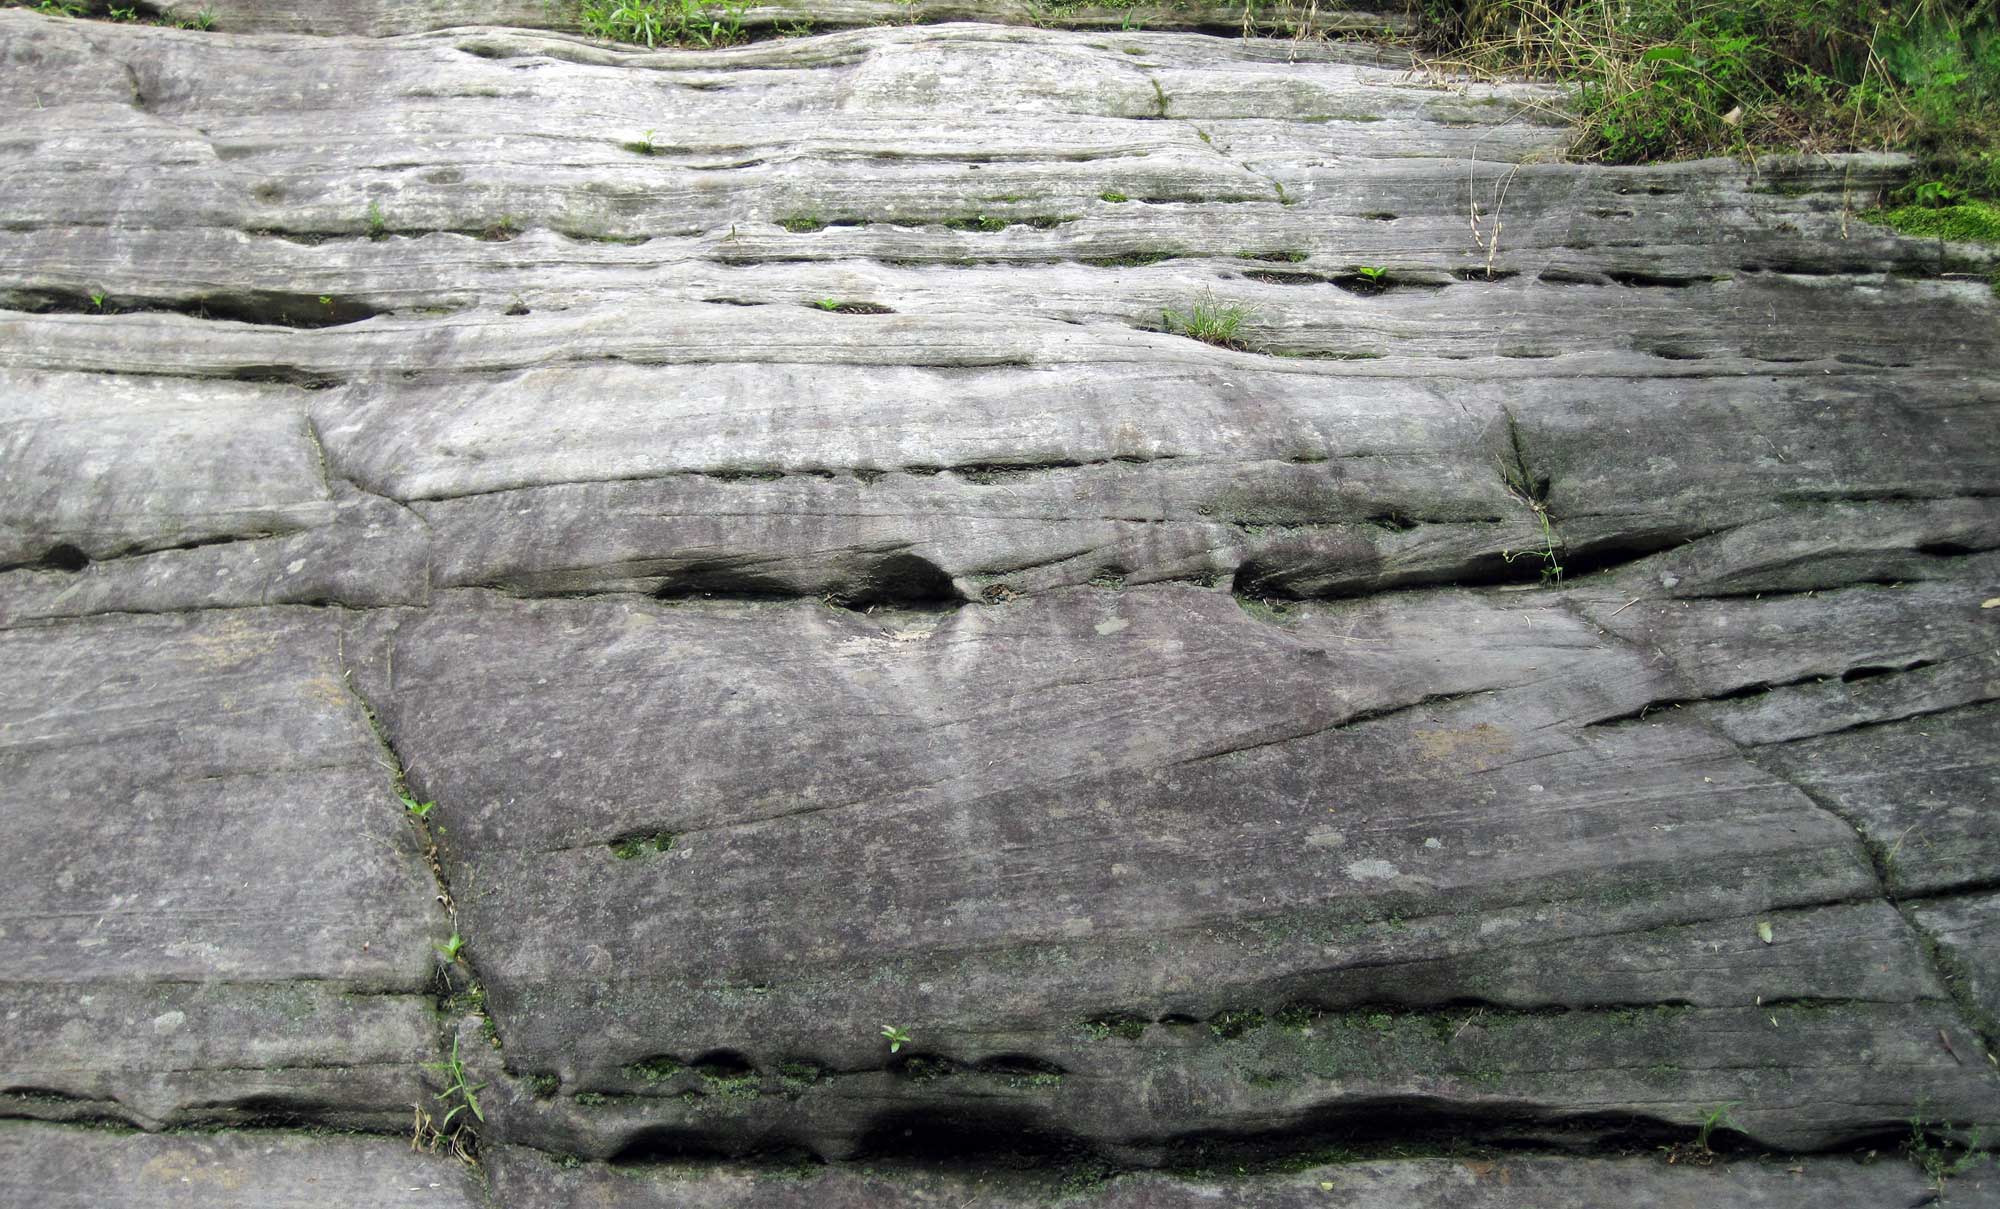 Photo of St. Peter Sandstsone, an Ordovician sandstone, outcropping in Missouri. The sandstone is gray in color and shows horizontal and angled bedding.